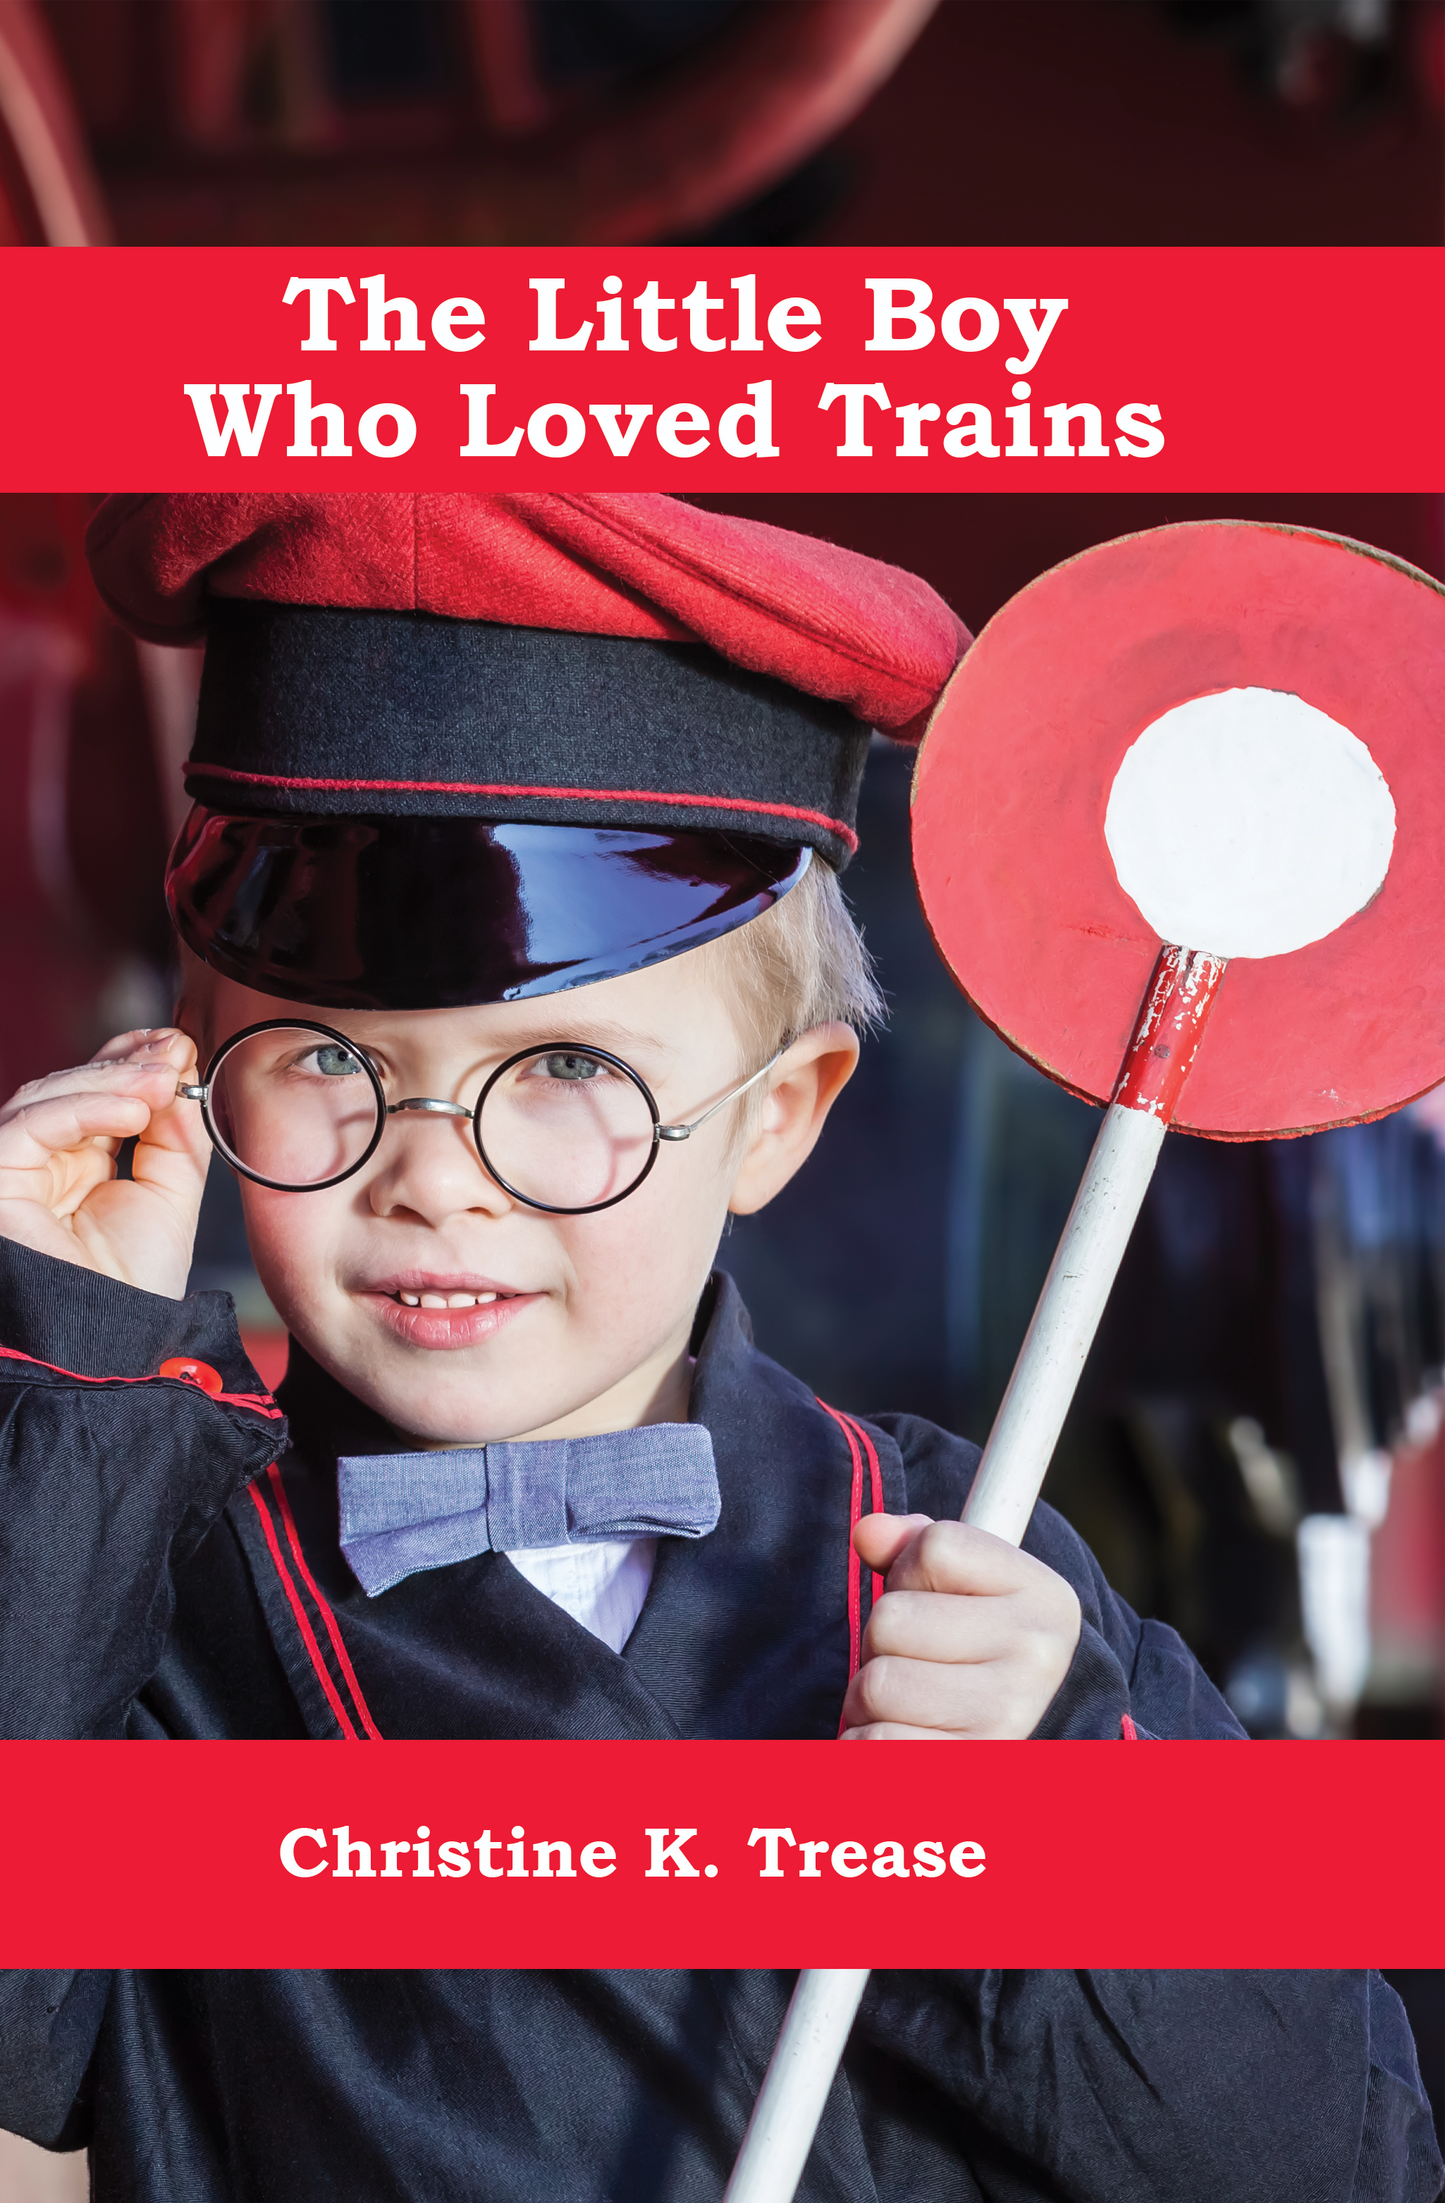 Book Children's-The Little Boy Who Loved Trains